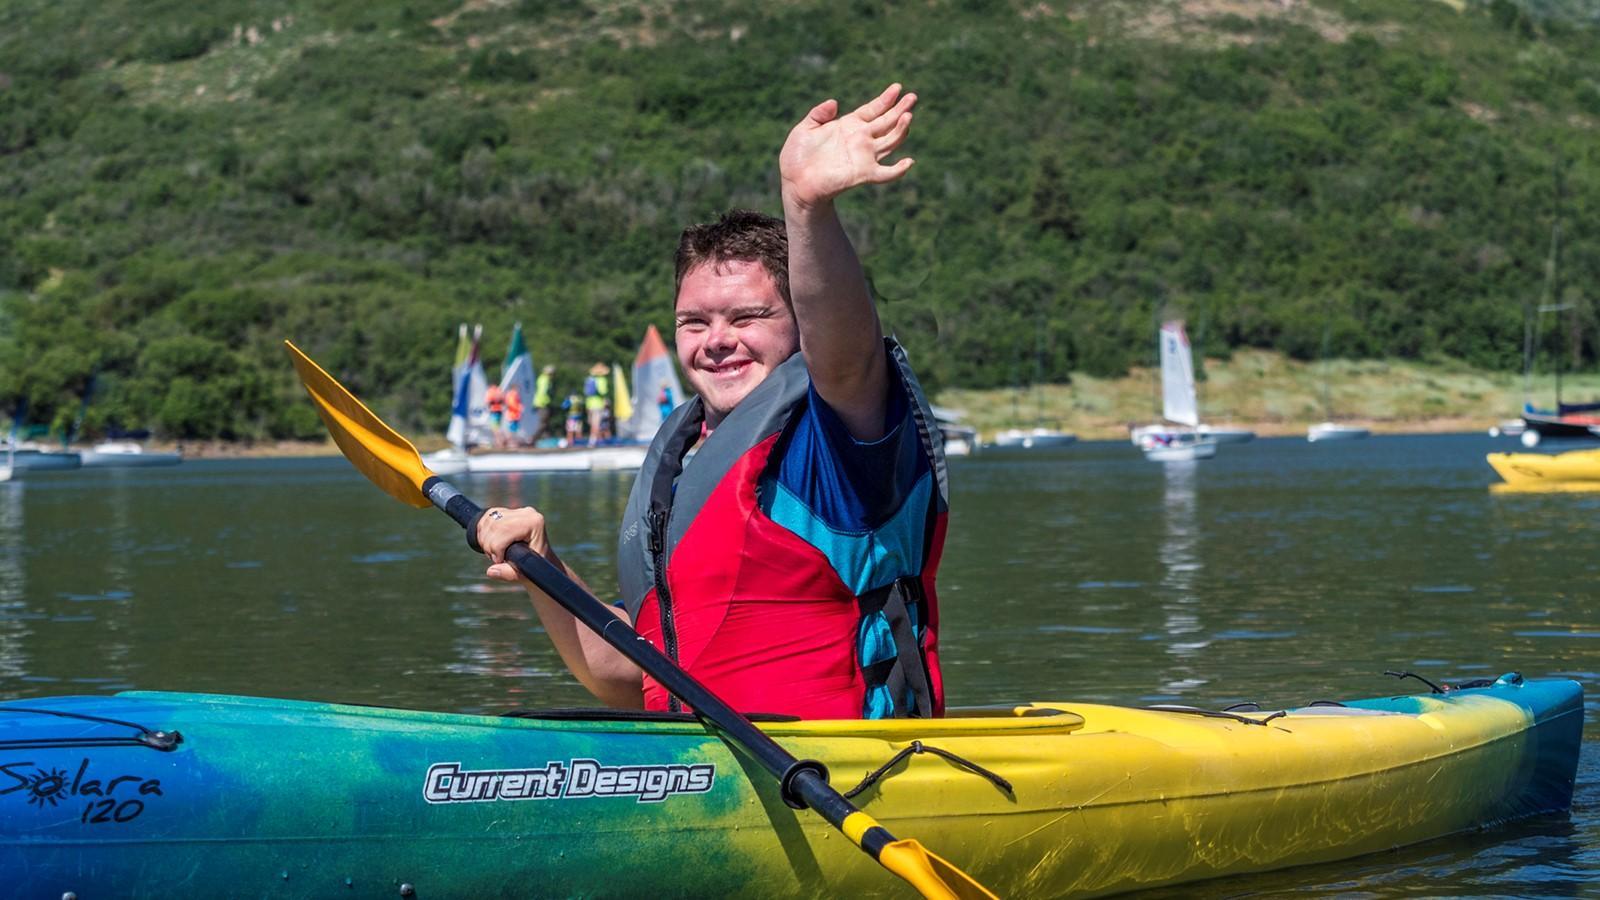 utahs-outdoors-are-wide-open-for-all-abilities